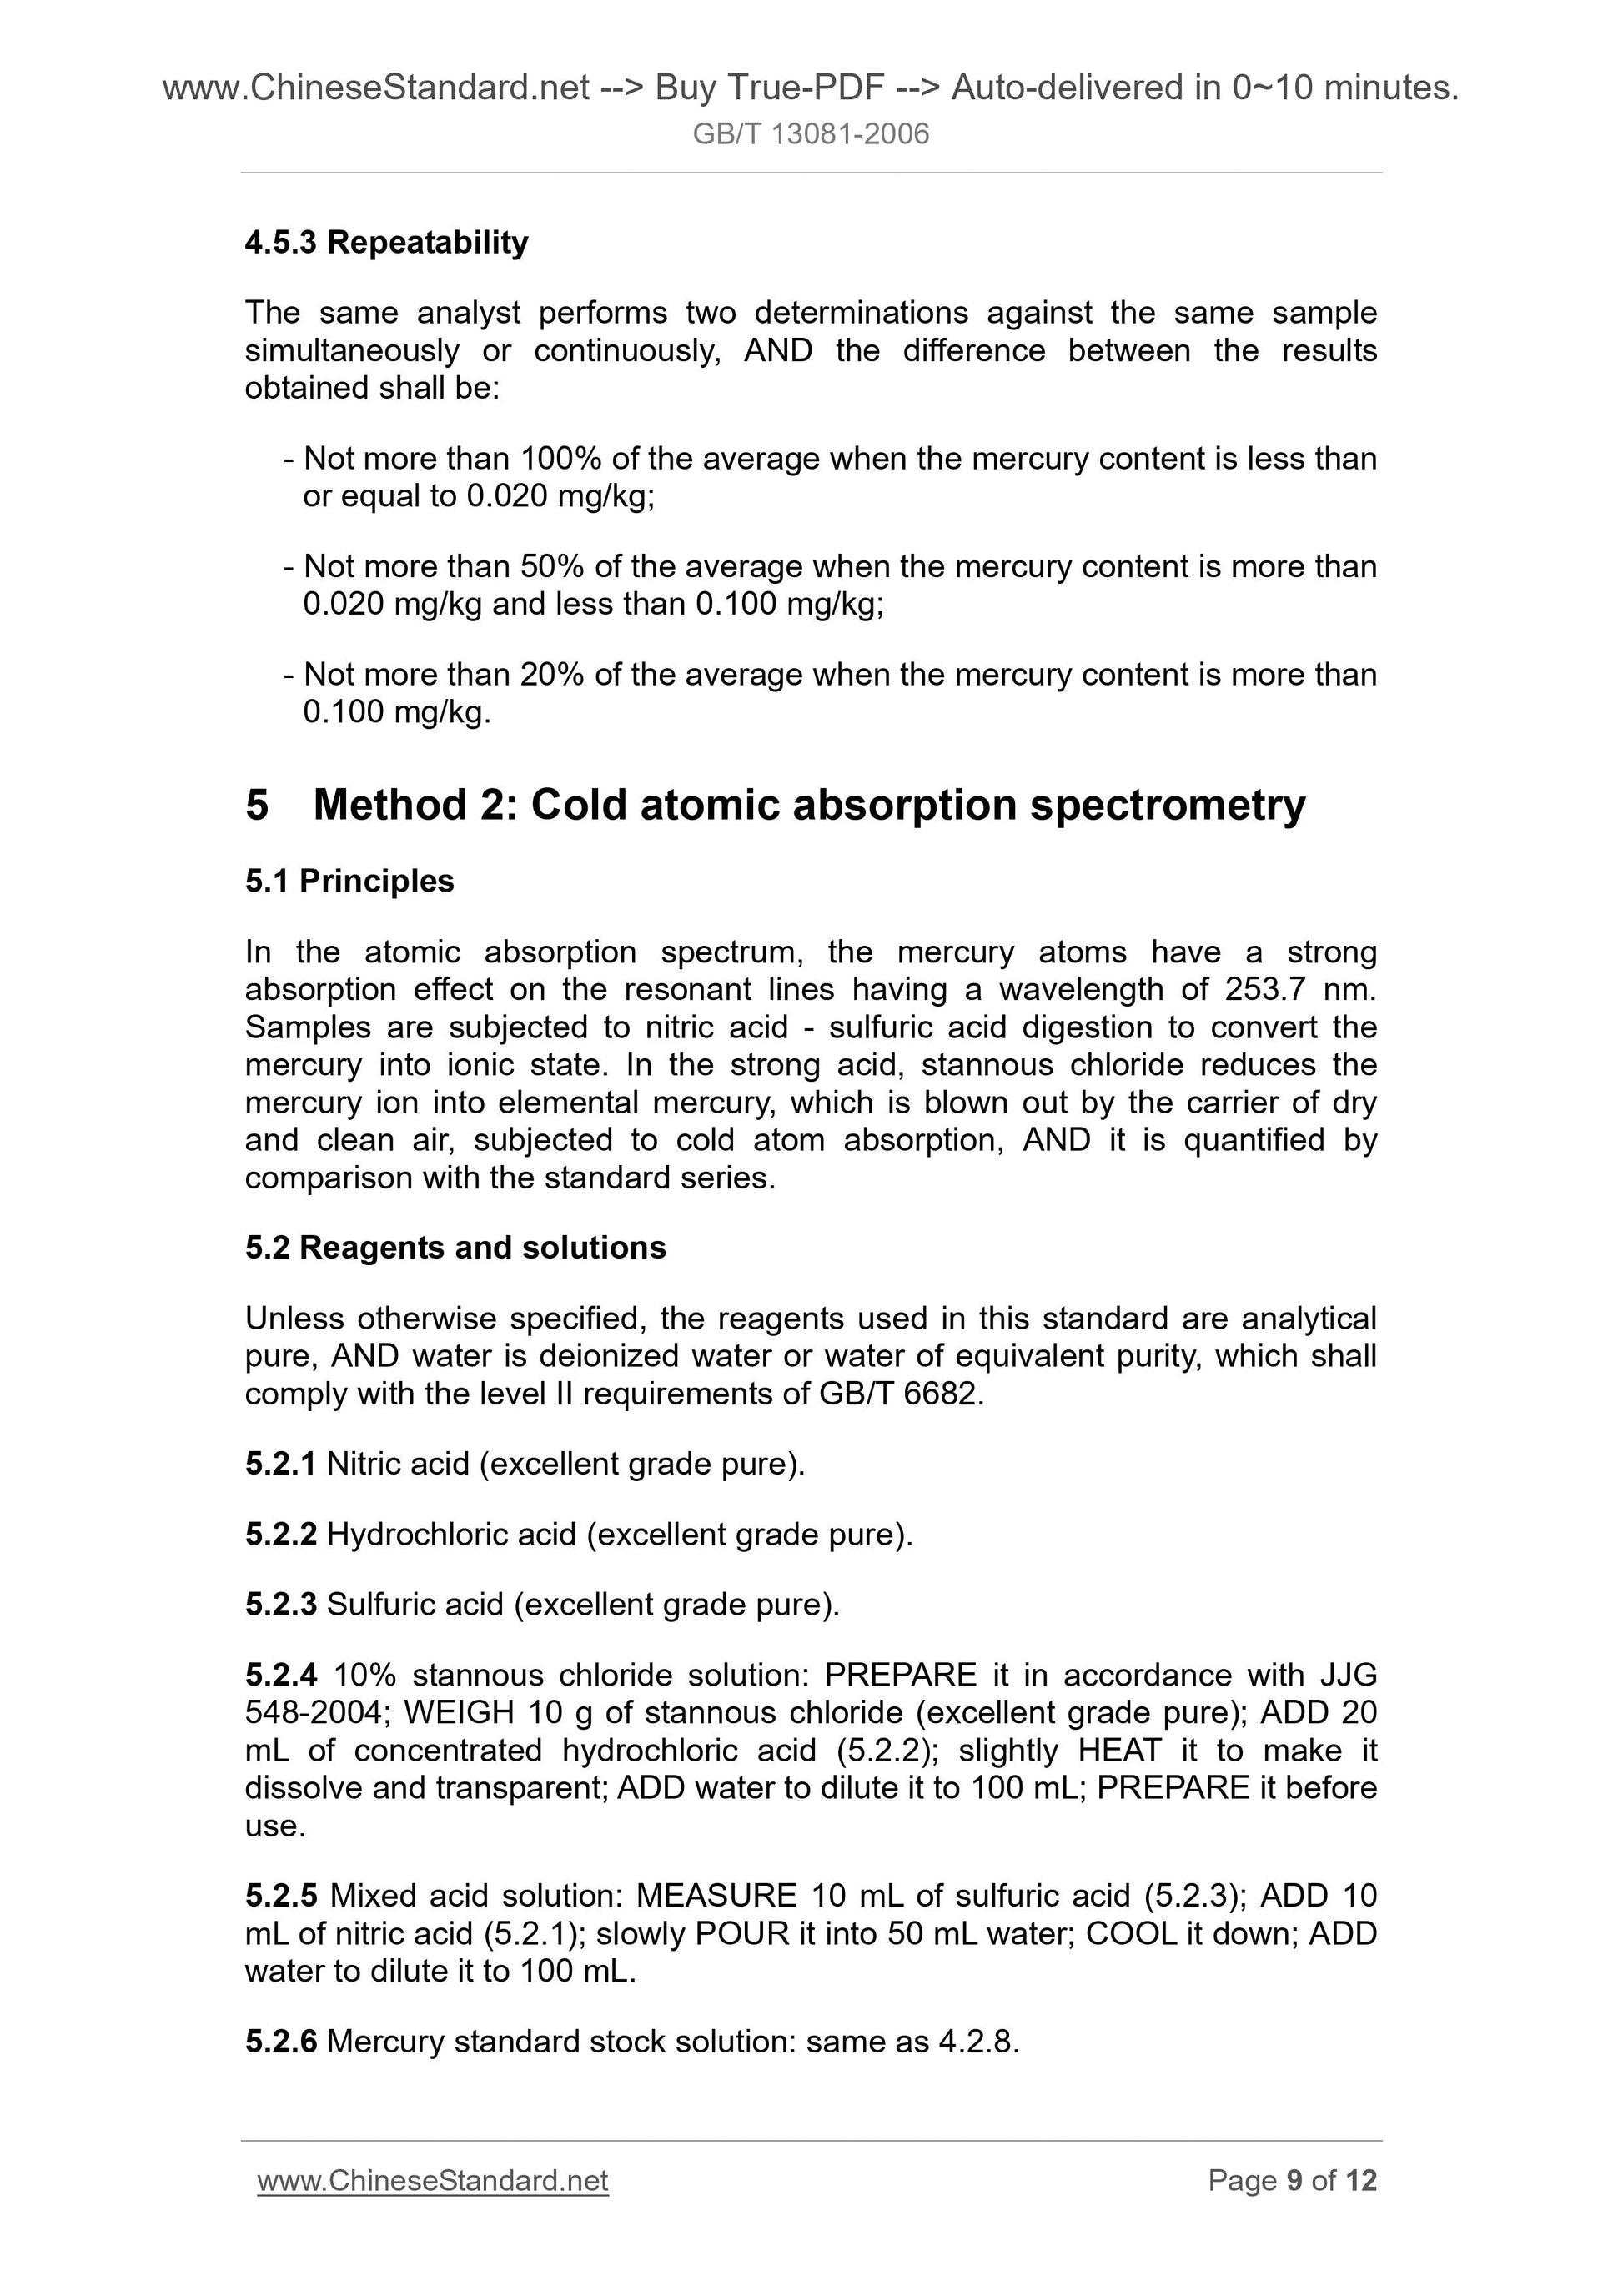 GB/T 13081-2006 Page 5